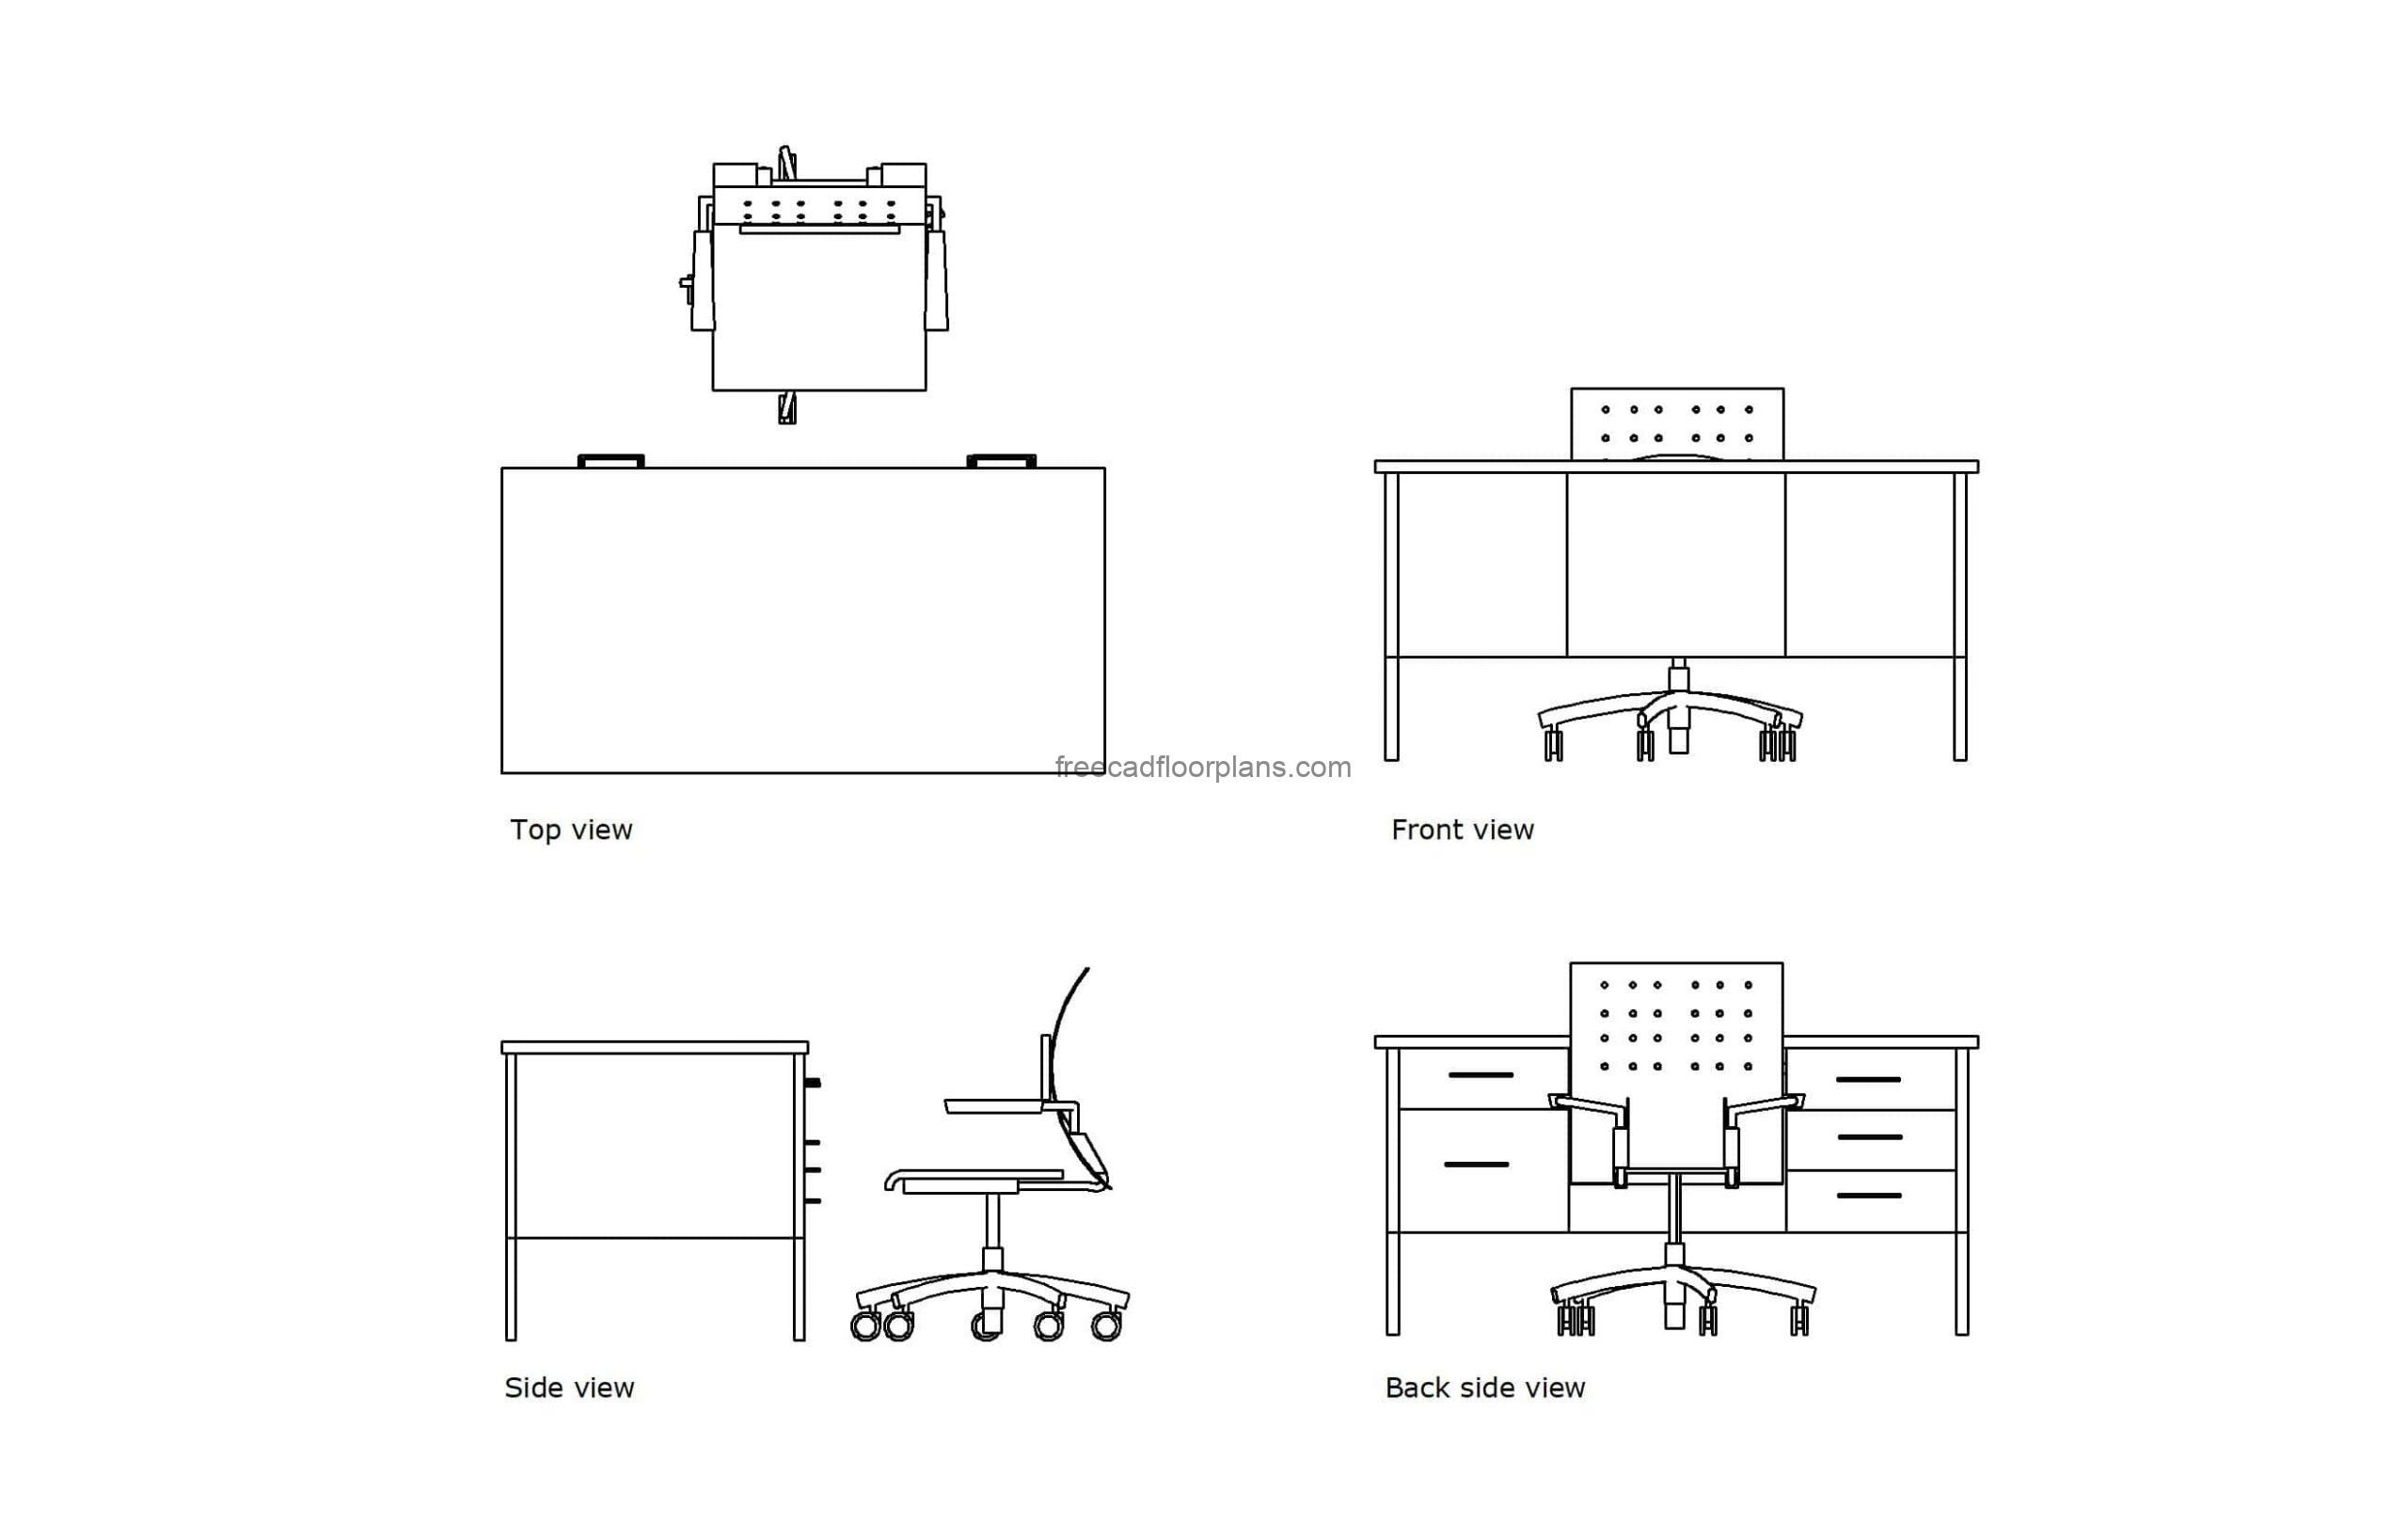 autocad drawing of a teachers desk, 2d plan and elevation views, dwg file free for download